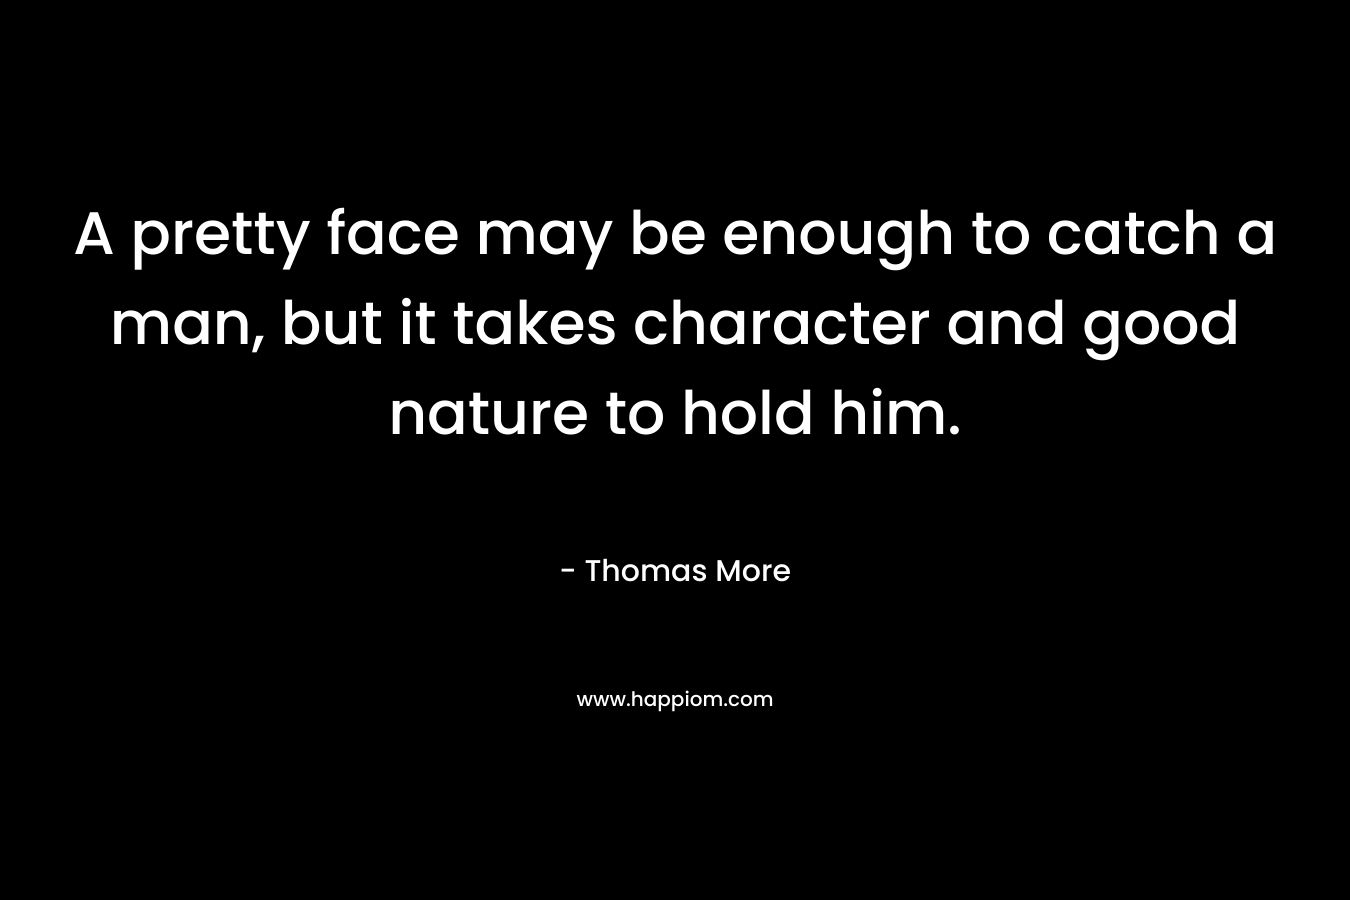 A pretty face may be enough to catch a man, but it takes character and good nature to hold him. – Thomas More